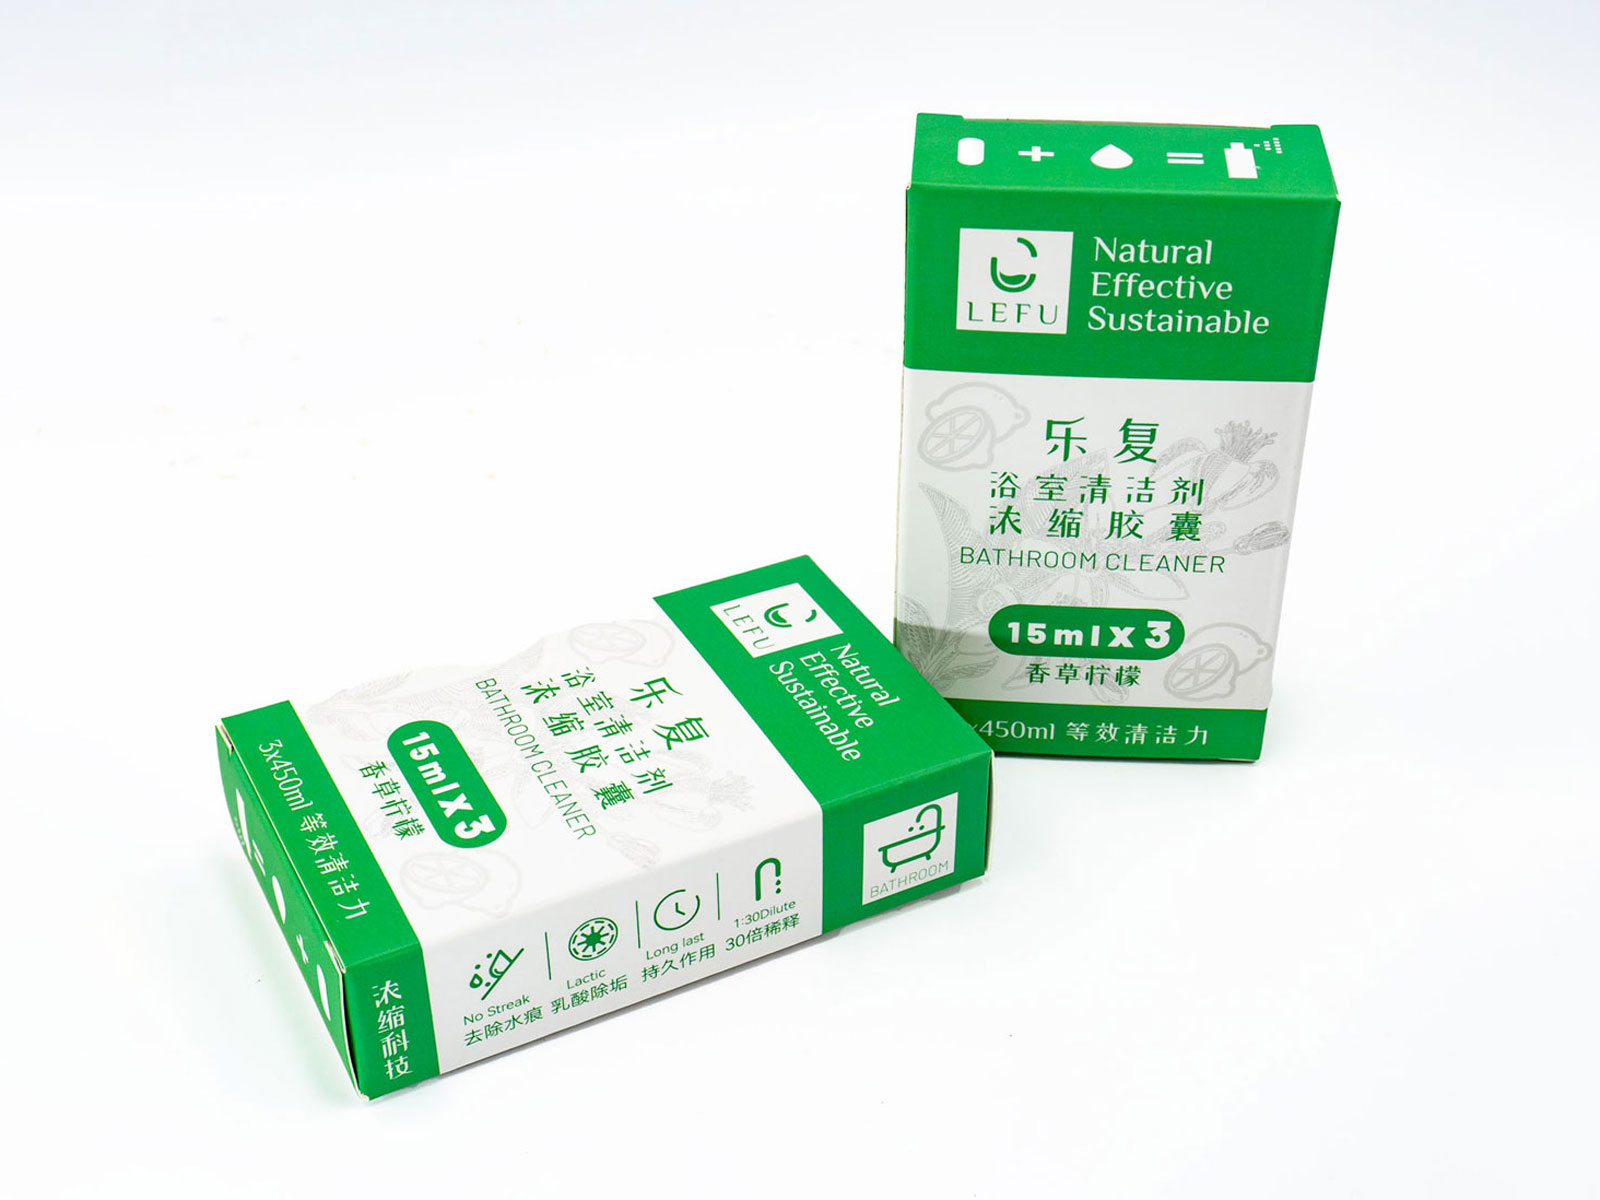 packages of the refill pods 